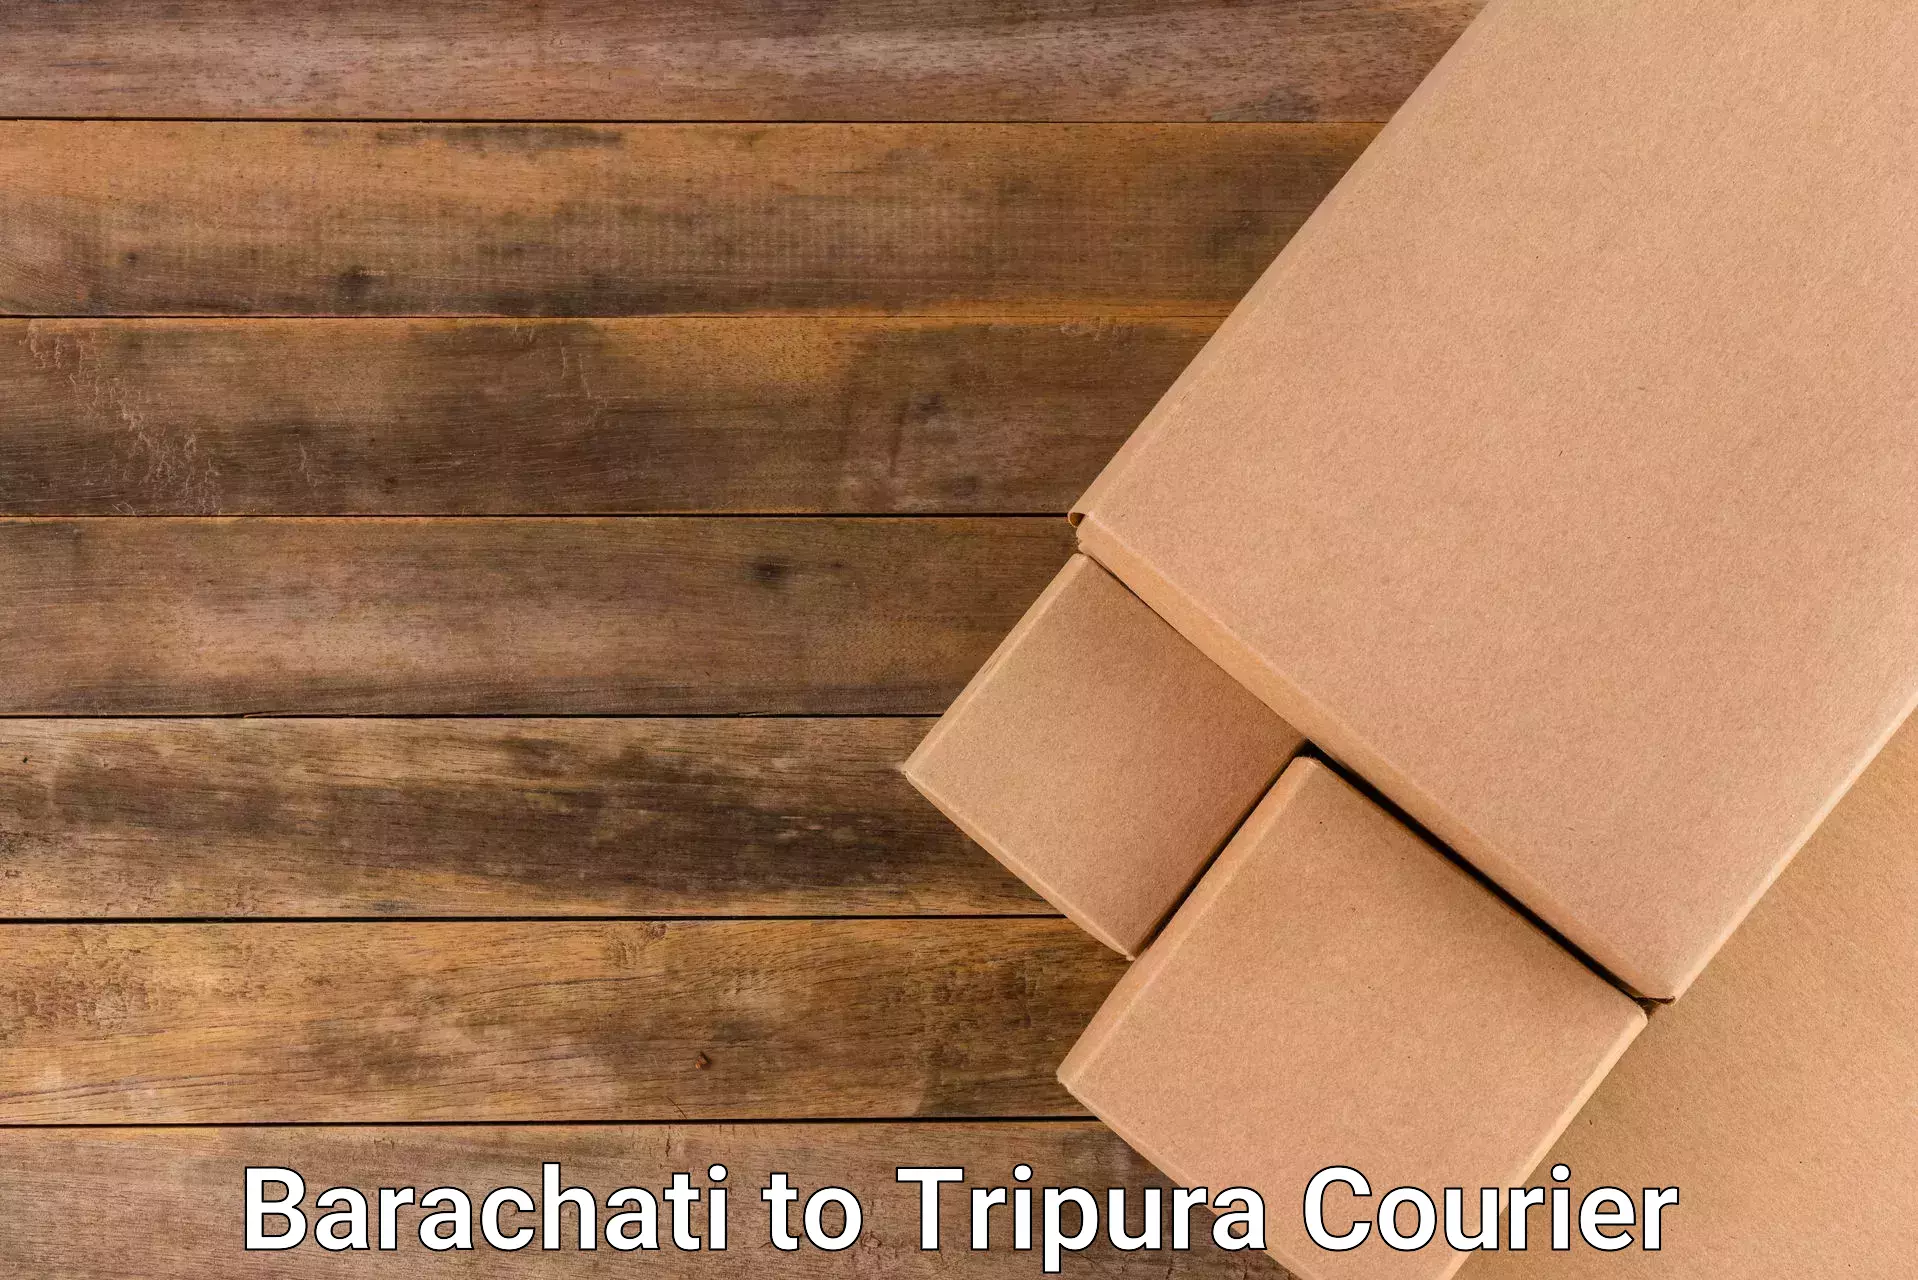 Cash on delivery service Barachati to Tripura